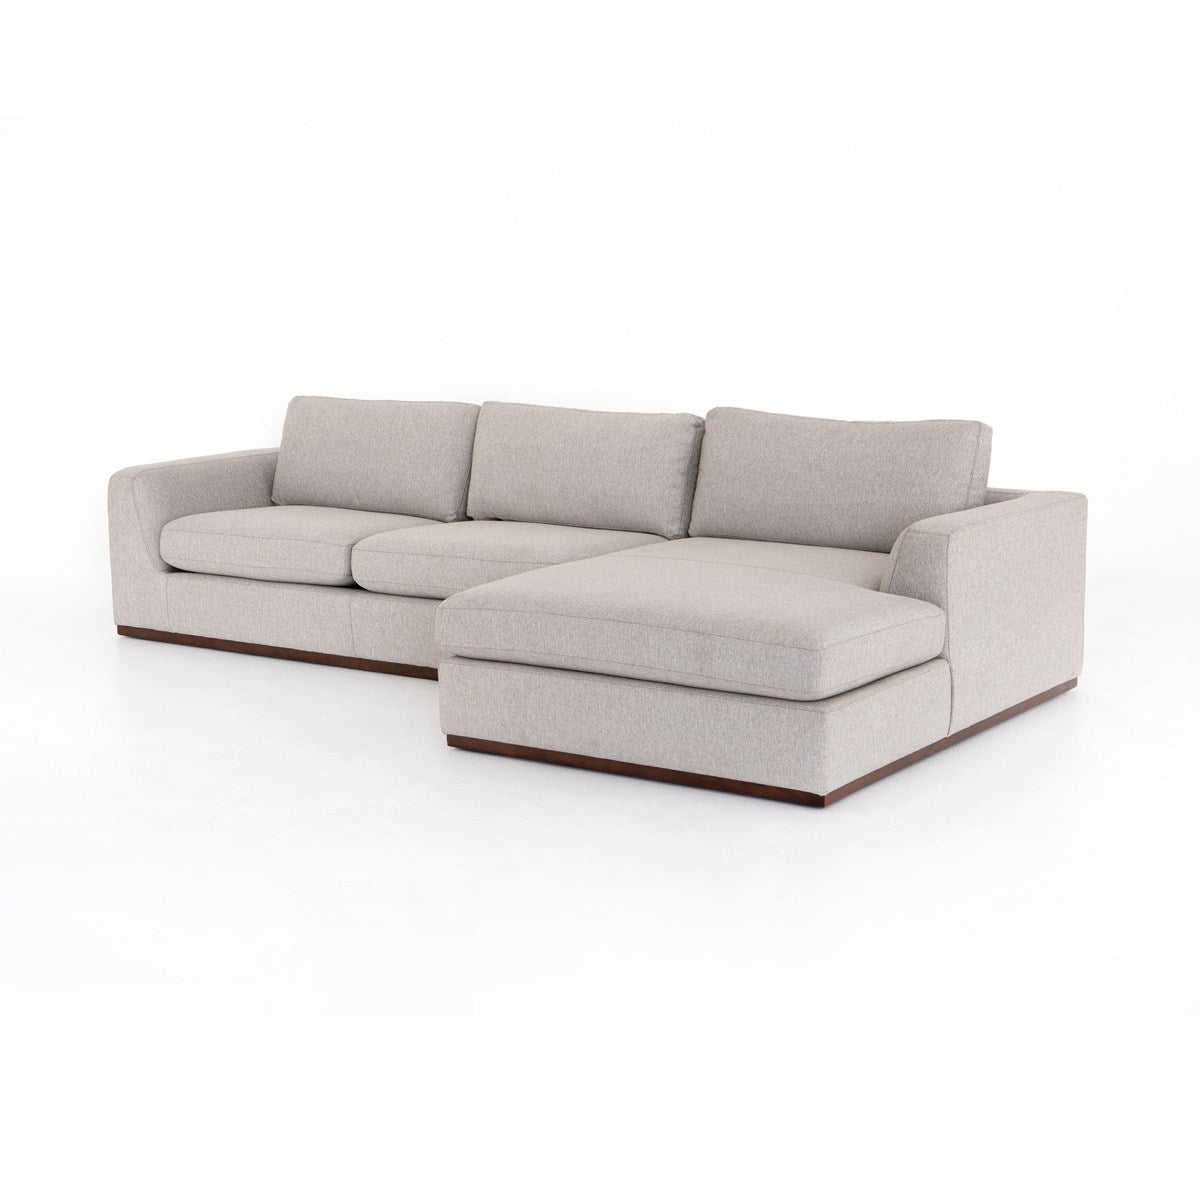 Colt 2-Piece Sectional Aldred Silver / Right Arm FacingSectional Sofa Four Hands  Aldred Silver Right Arm Facing  Four Hands, Burke Decor, Mid Century Modern Furniture, Old Bones Furniture Company, Old Bones Co, Modern Mid Century, Designer Furniture, https://www.oldbonesco.com/